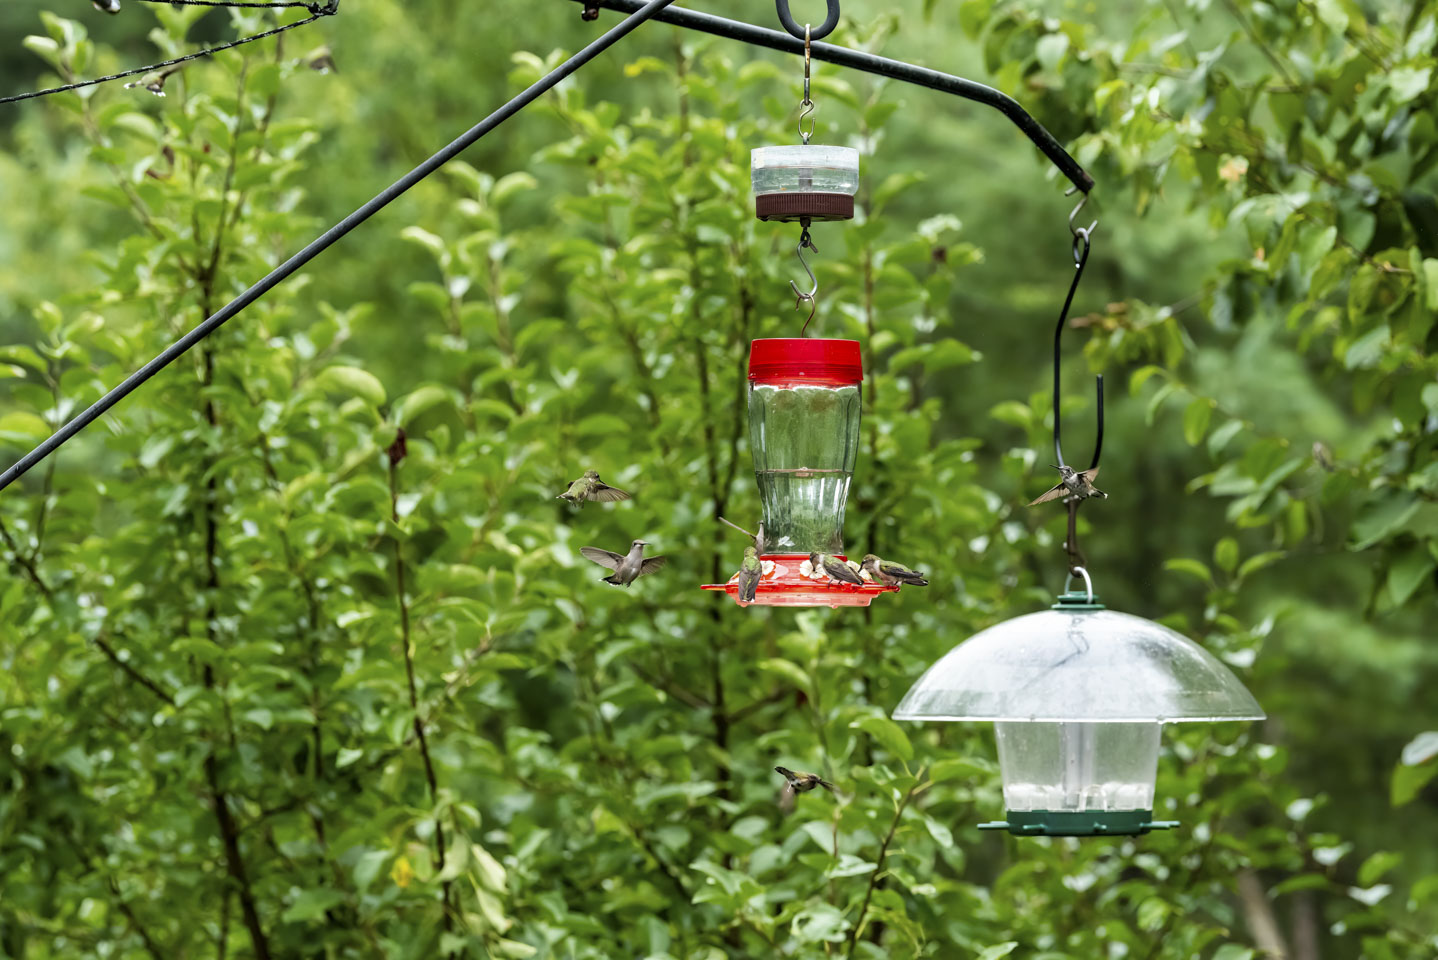 hummingbird feeder with some Ruby Throated Hummingbirds feeding and some flying